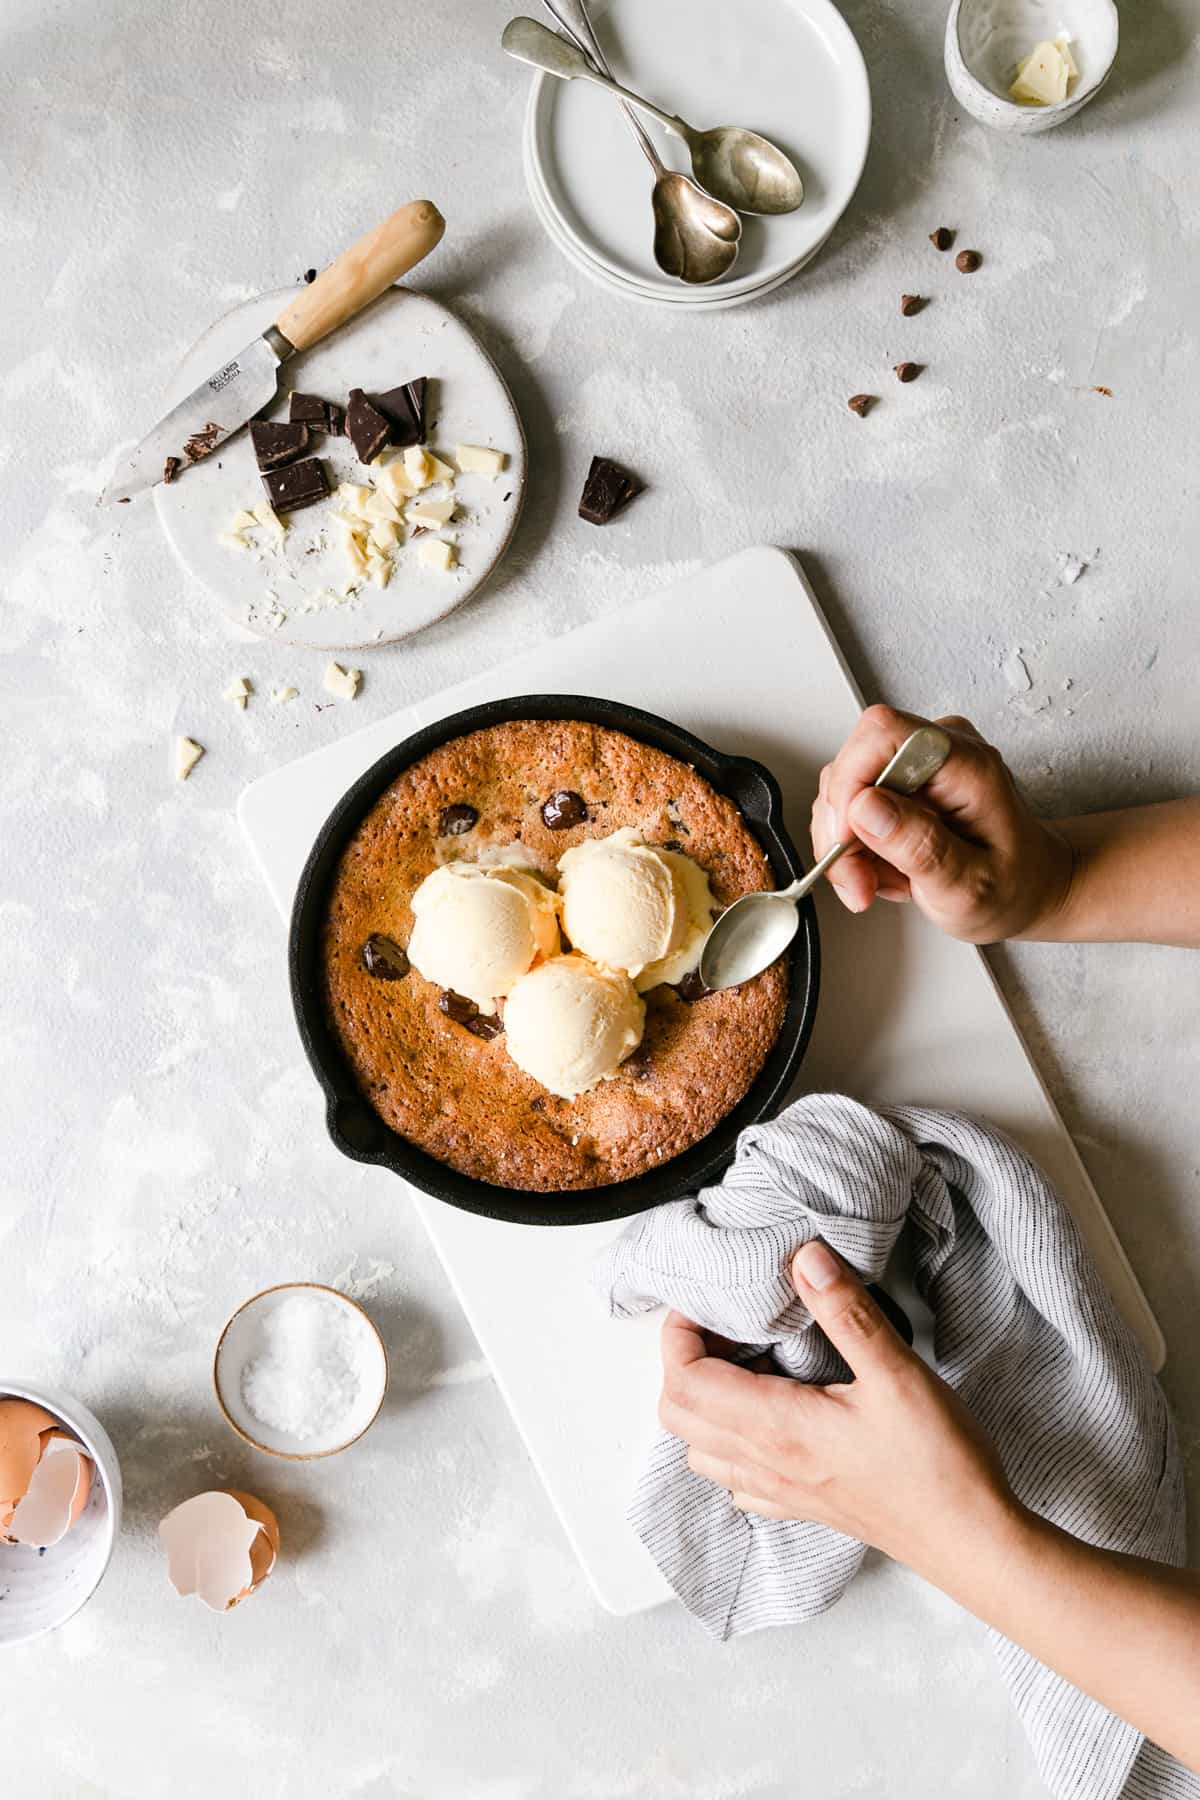 top view of a person holding skillet with chocolate chip cookie topped with vanilla ice cream